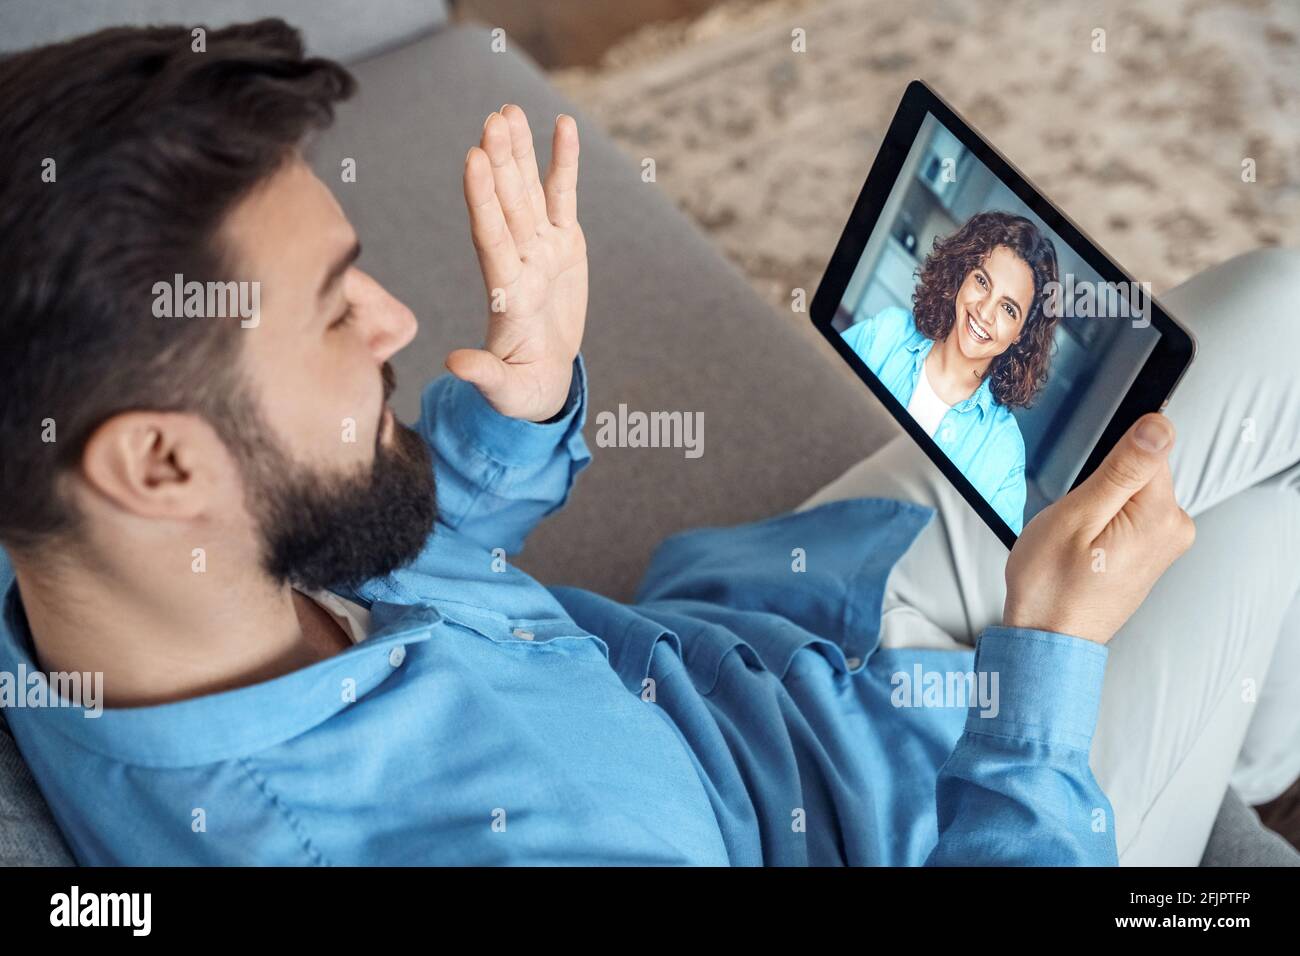 Young man holding tablet in hands having video call chat with female friend Stock Photo